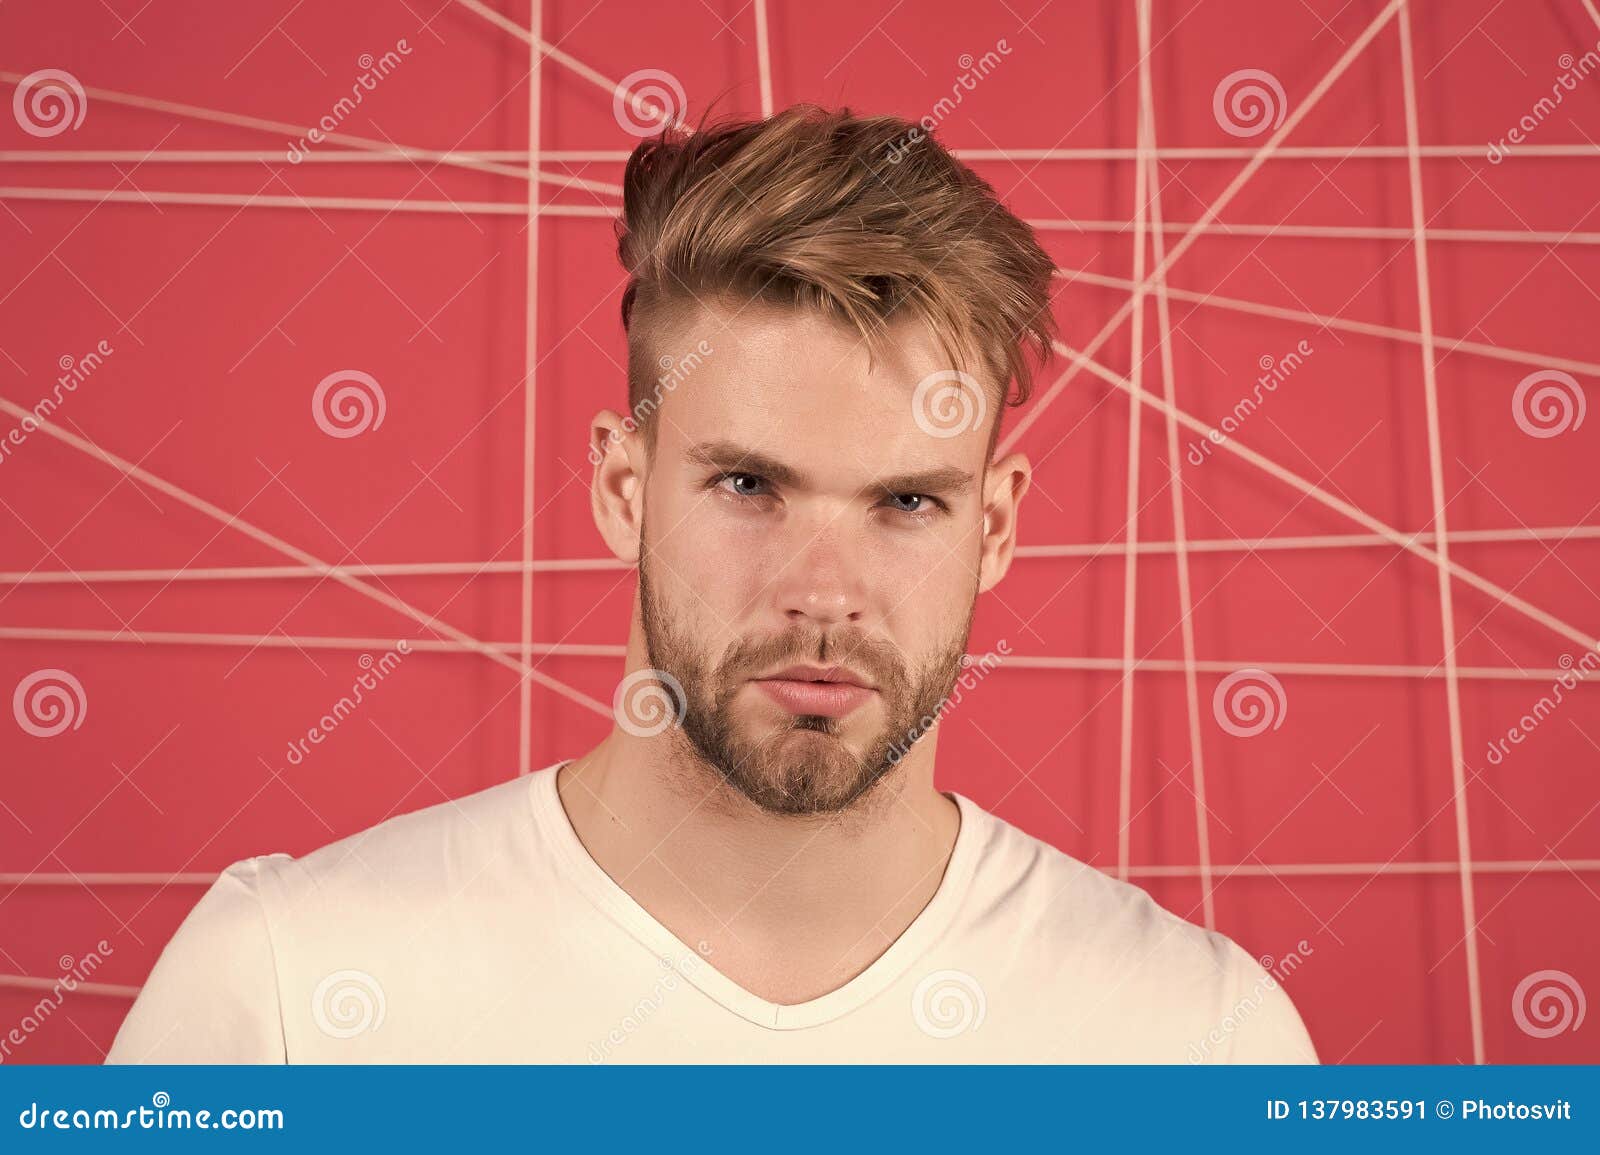 Macho With Beard On Unshaven Face Bearded Man With Blond Hair And